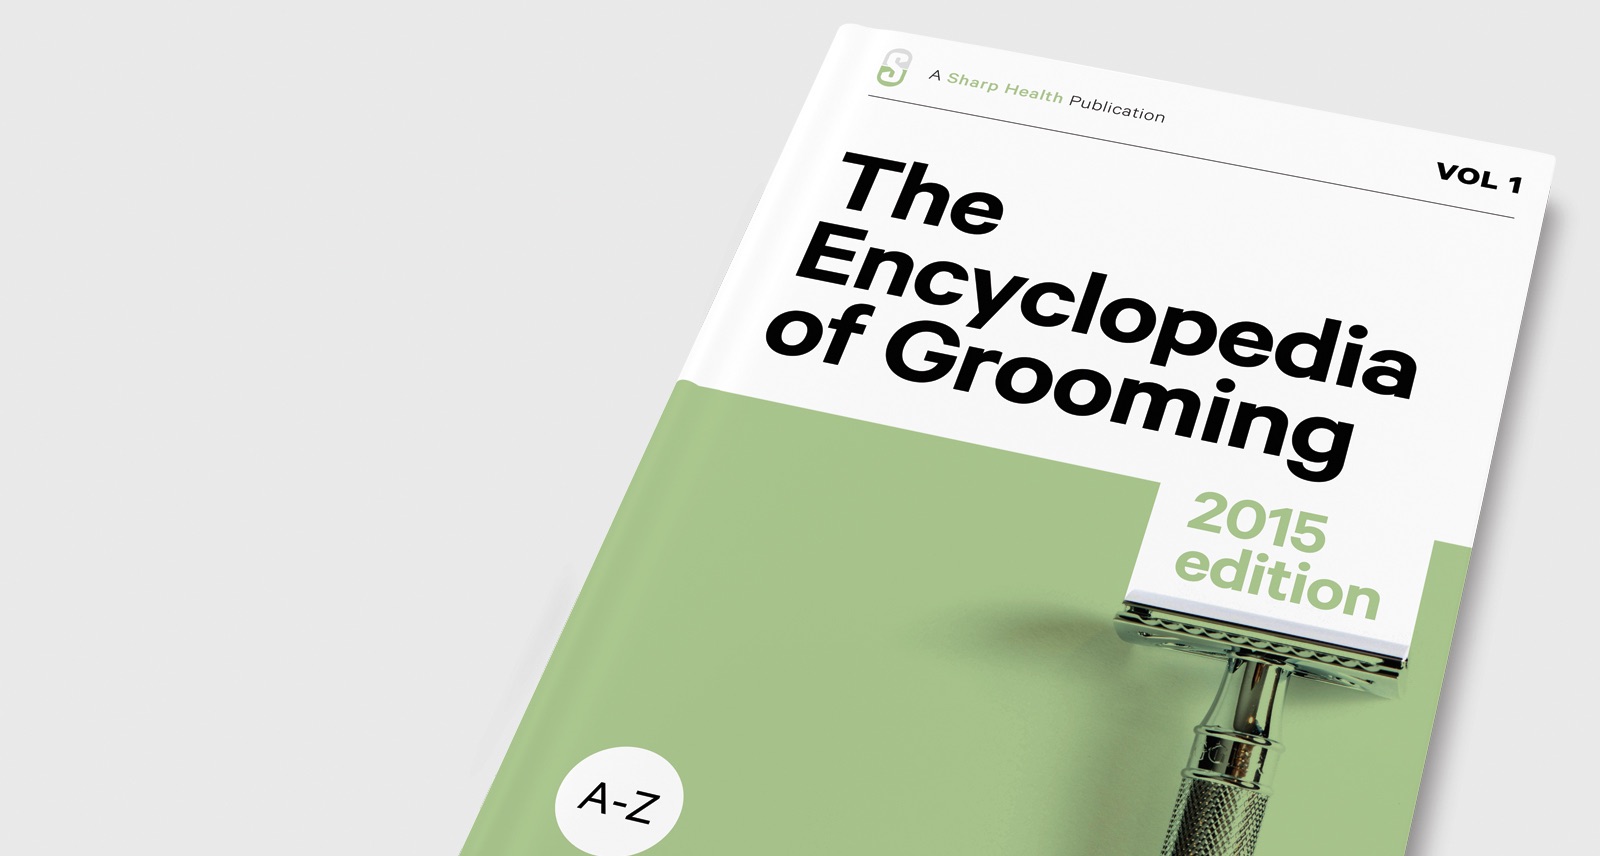 A-Z Mens Grooming Guide